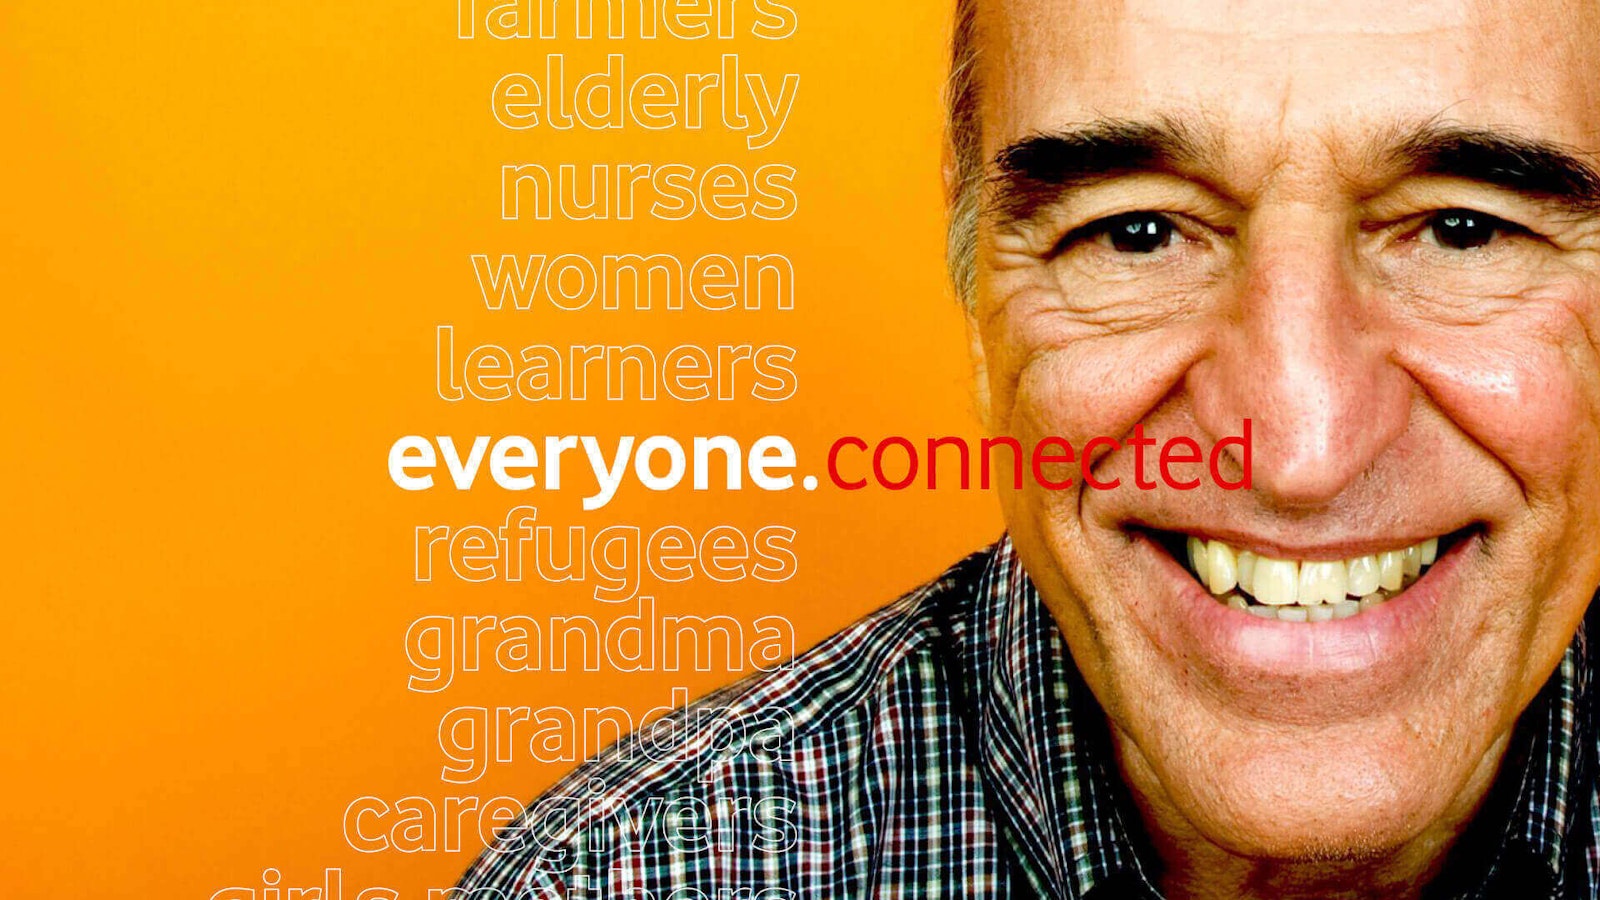 VF_Inclusion_Banner-everyone_connected-16_9-Portrait_12